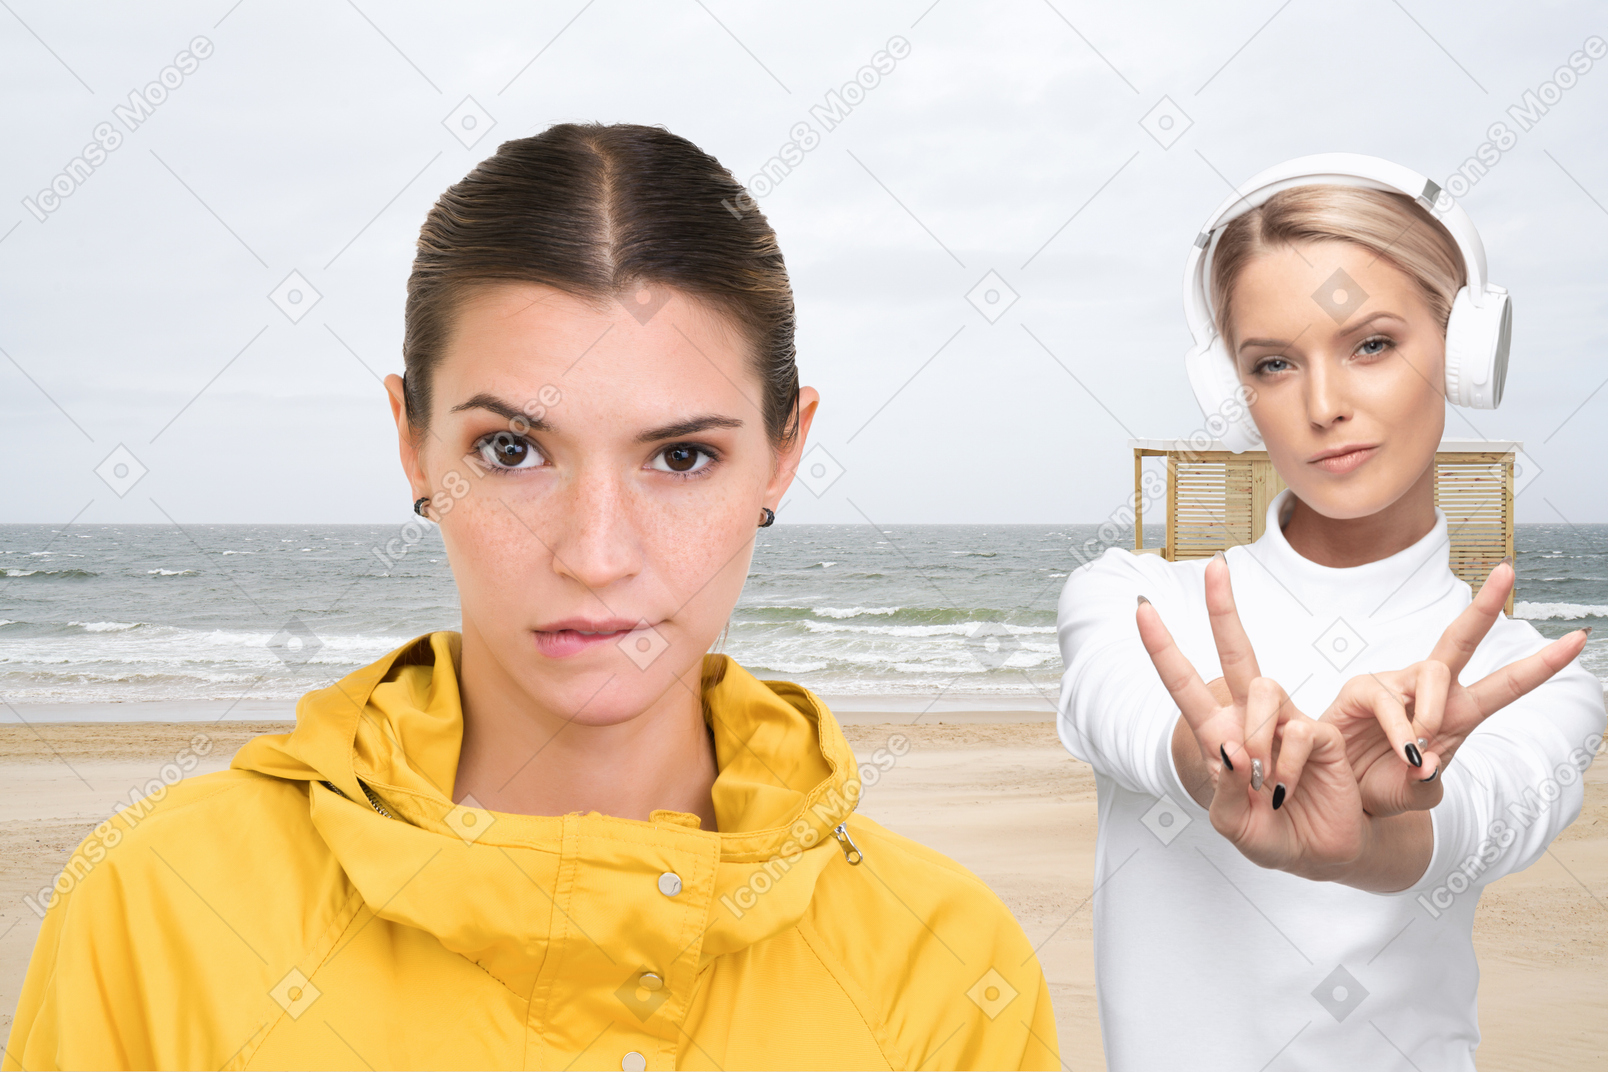 A woman making a peace sign next to another woman on the beach